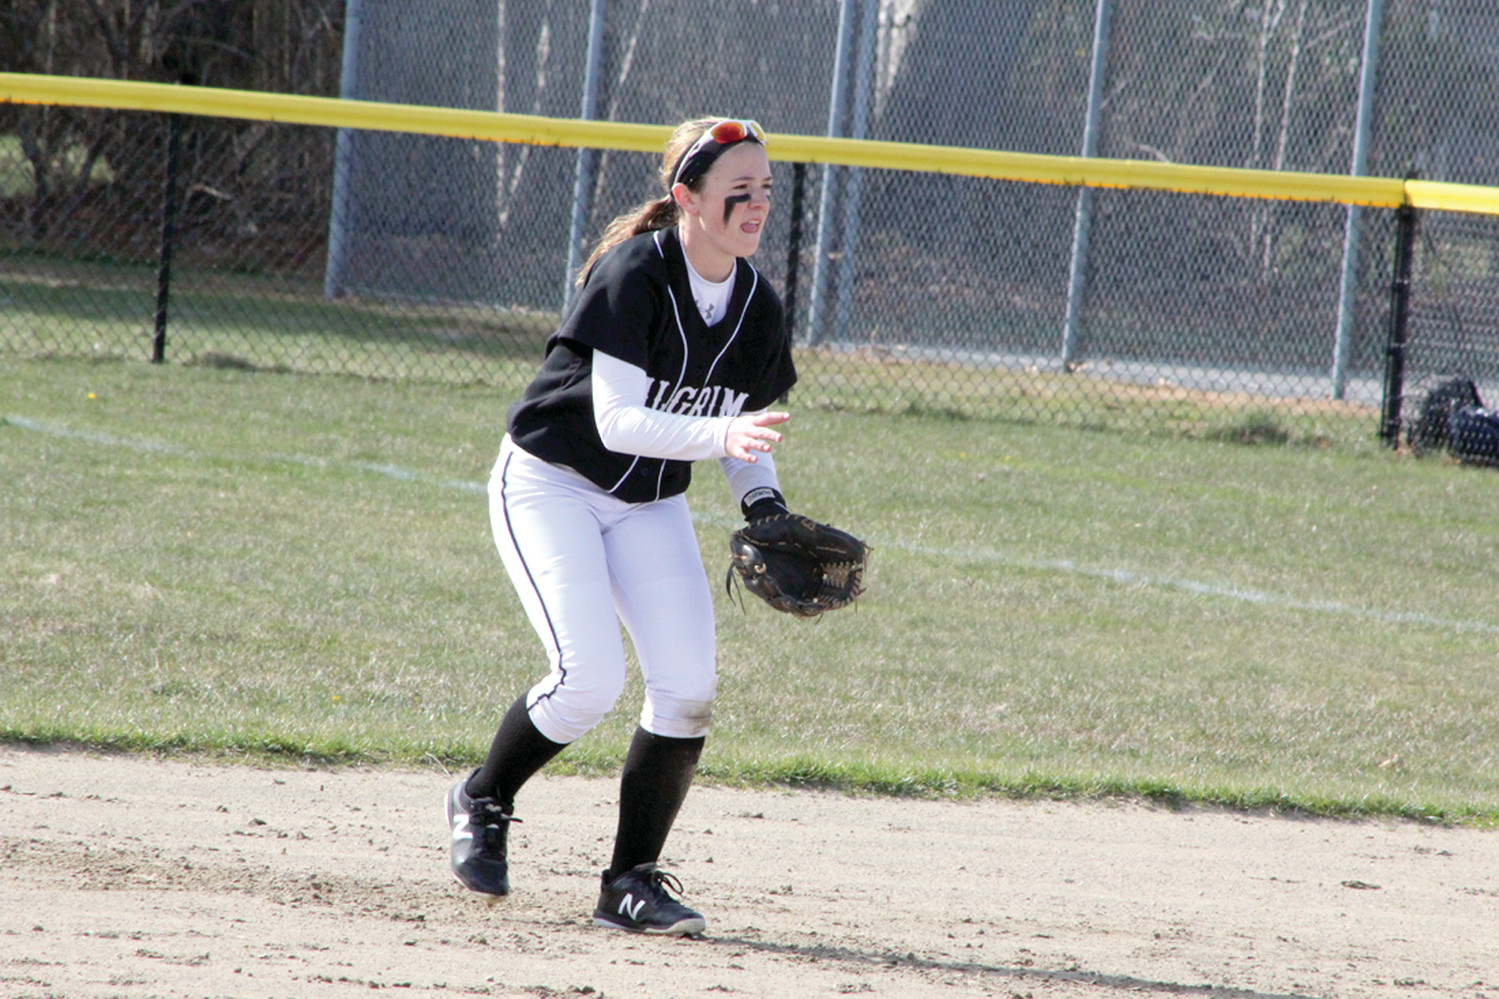 READY TO MAKE A PLAY: Freshman Madison D’Amato, who drove in one of  two Pilgrim runs on Tuesday, settles into her post at second base during Pilgrim’s 4-2 loss to Moses Brown.